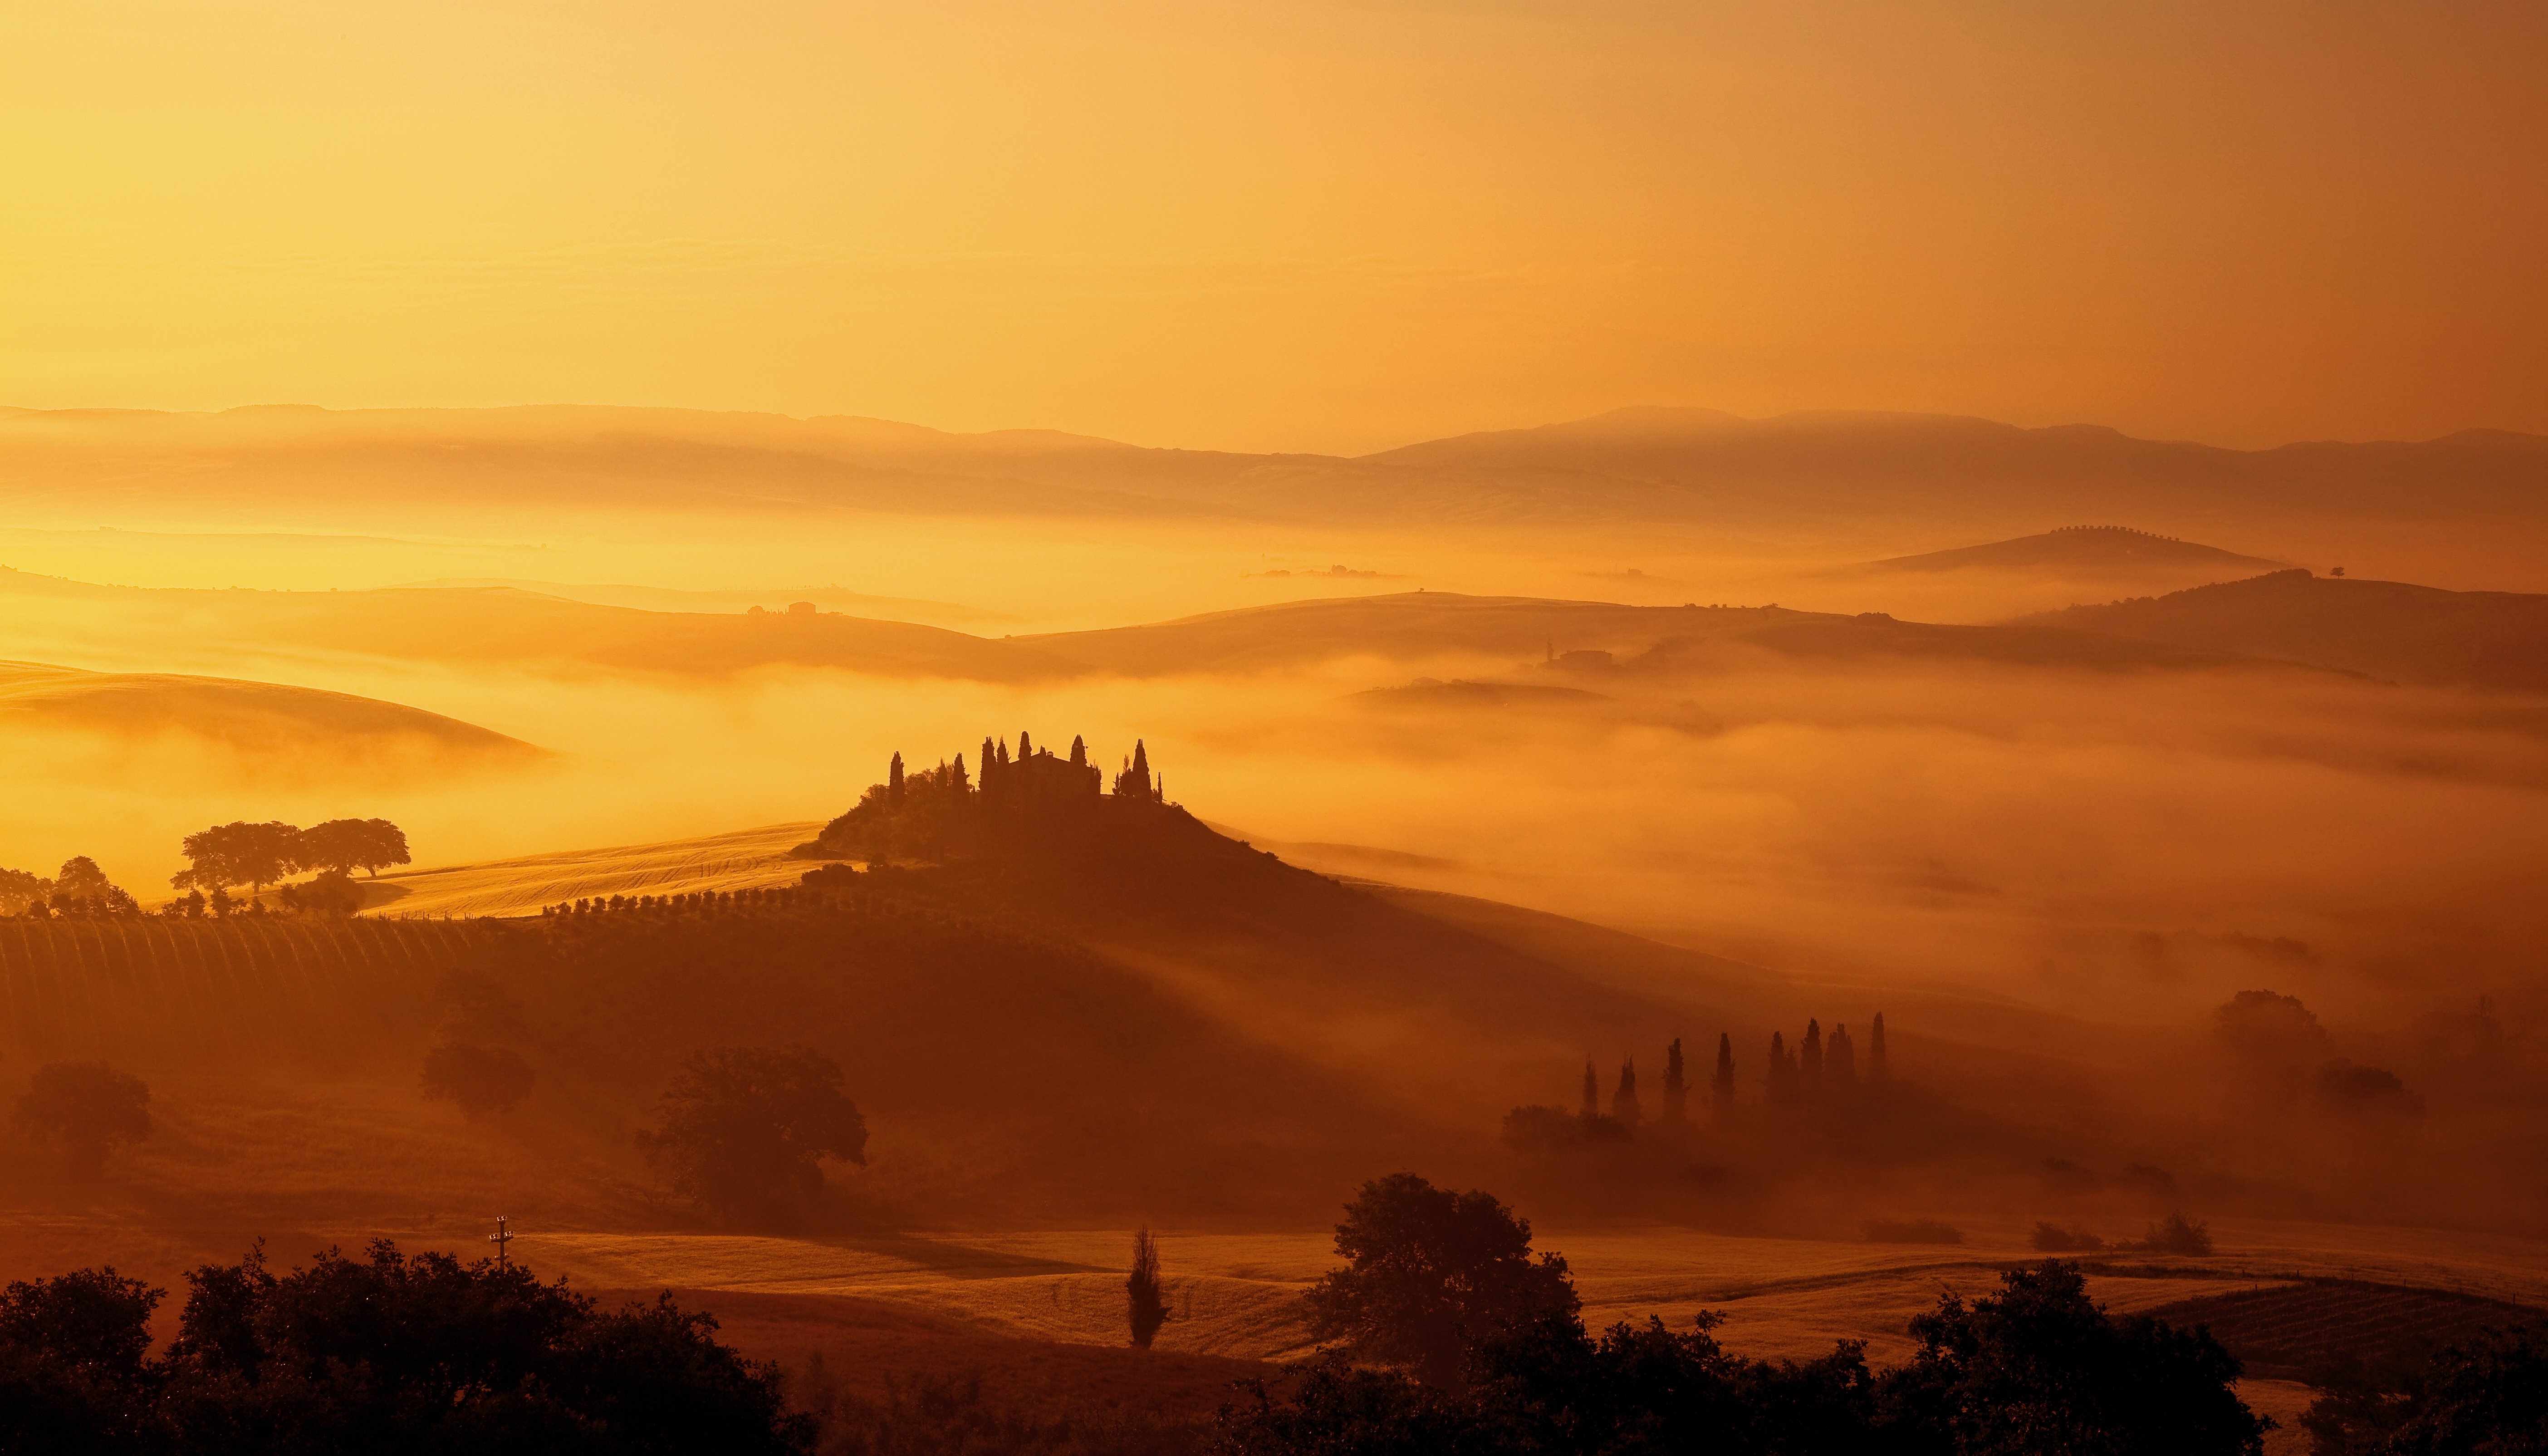 Read Val d'Orcia - Under the Tuscan Sun by Dev